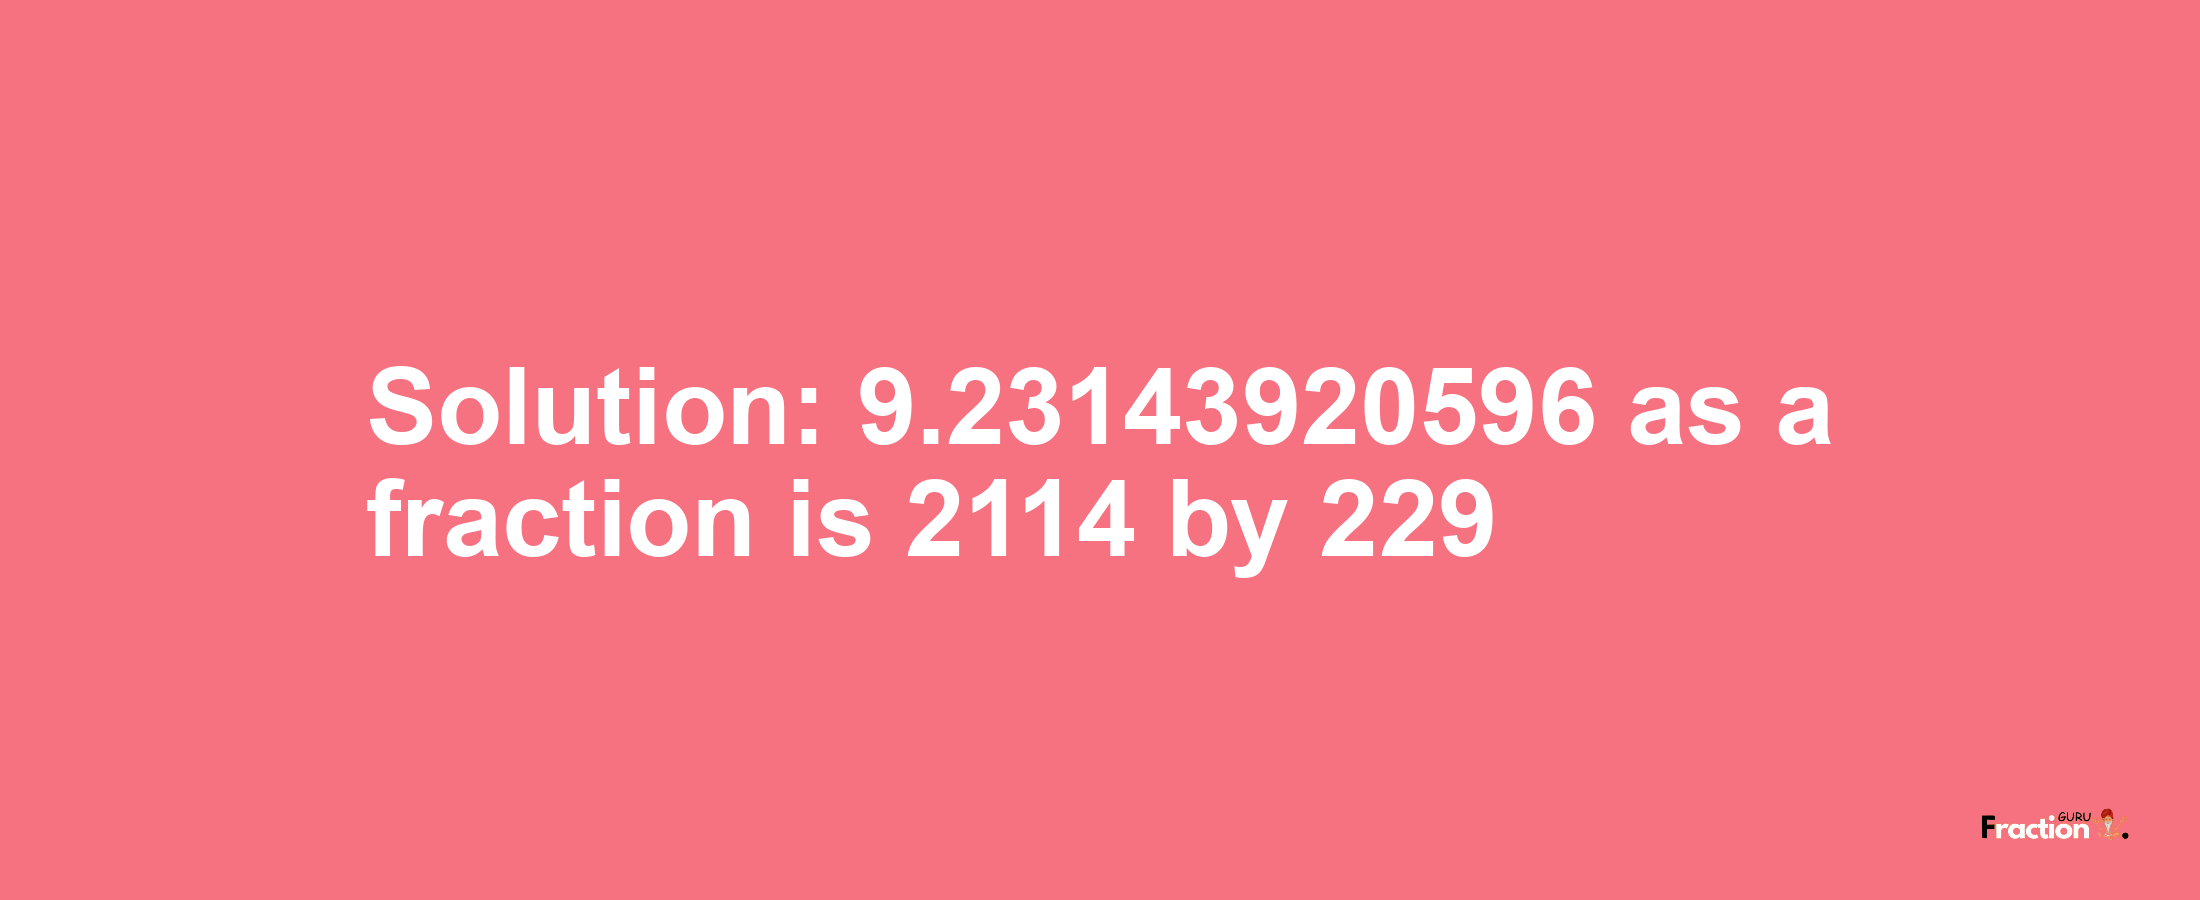 Solution:9.23143920596 as a fraction is 2114/229